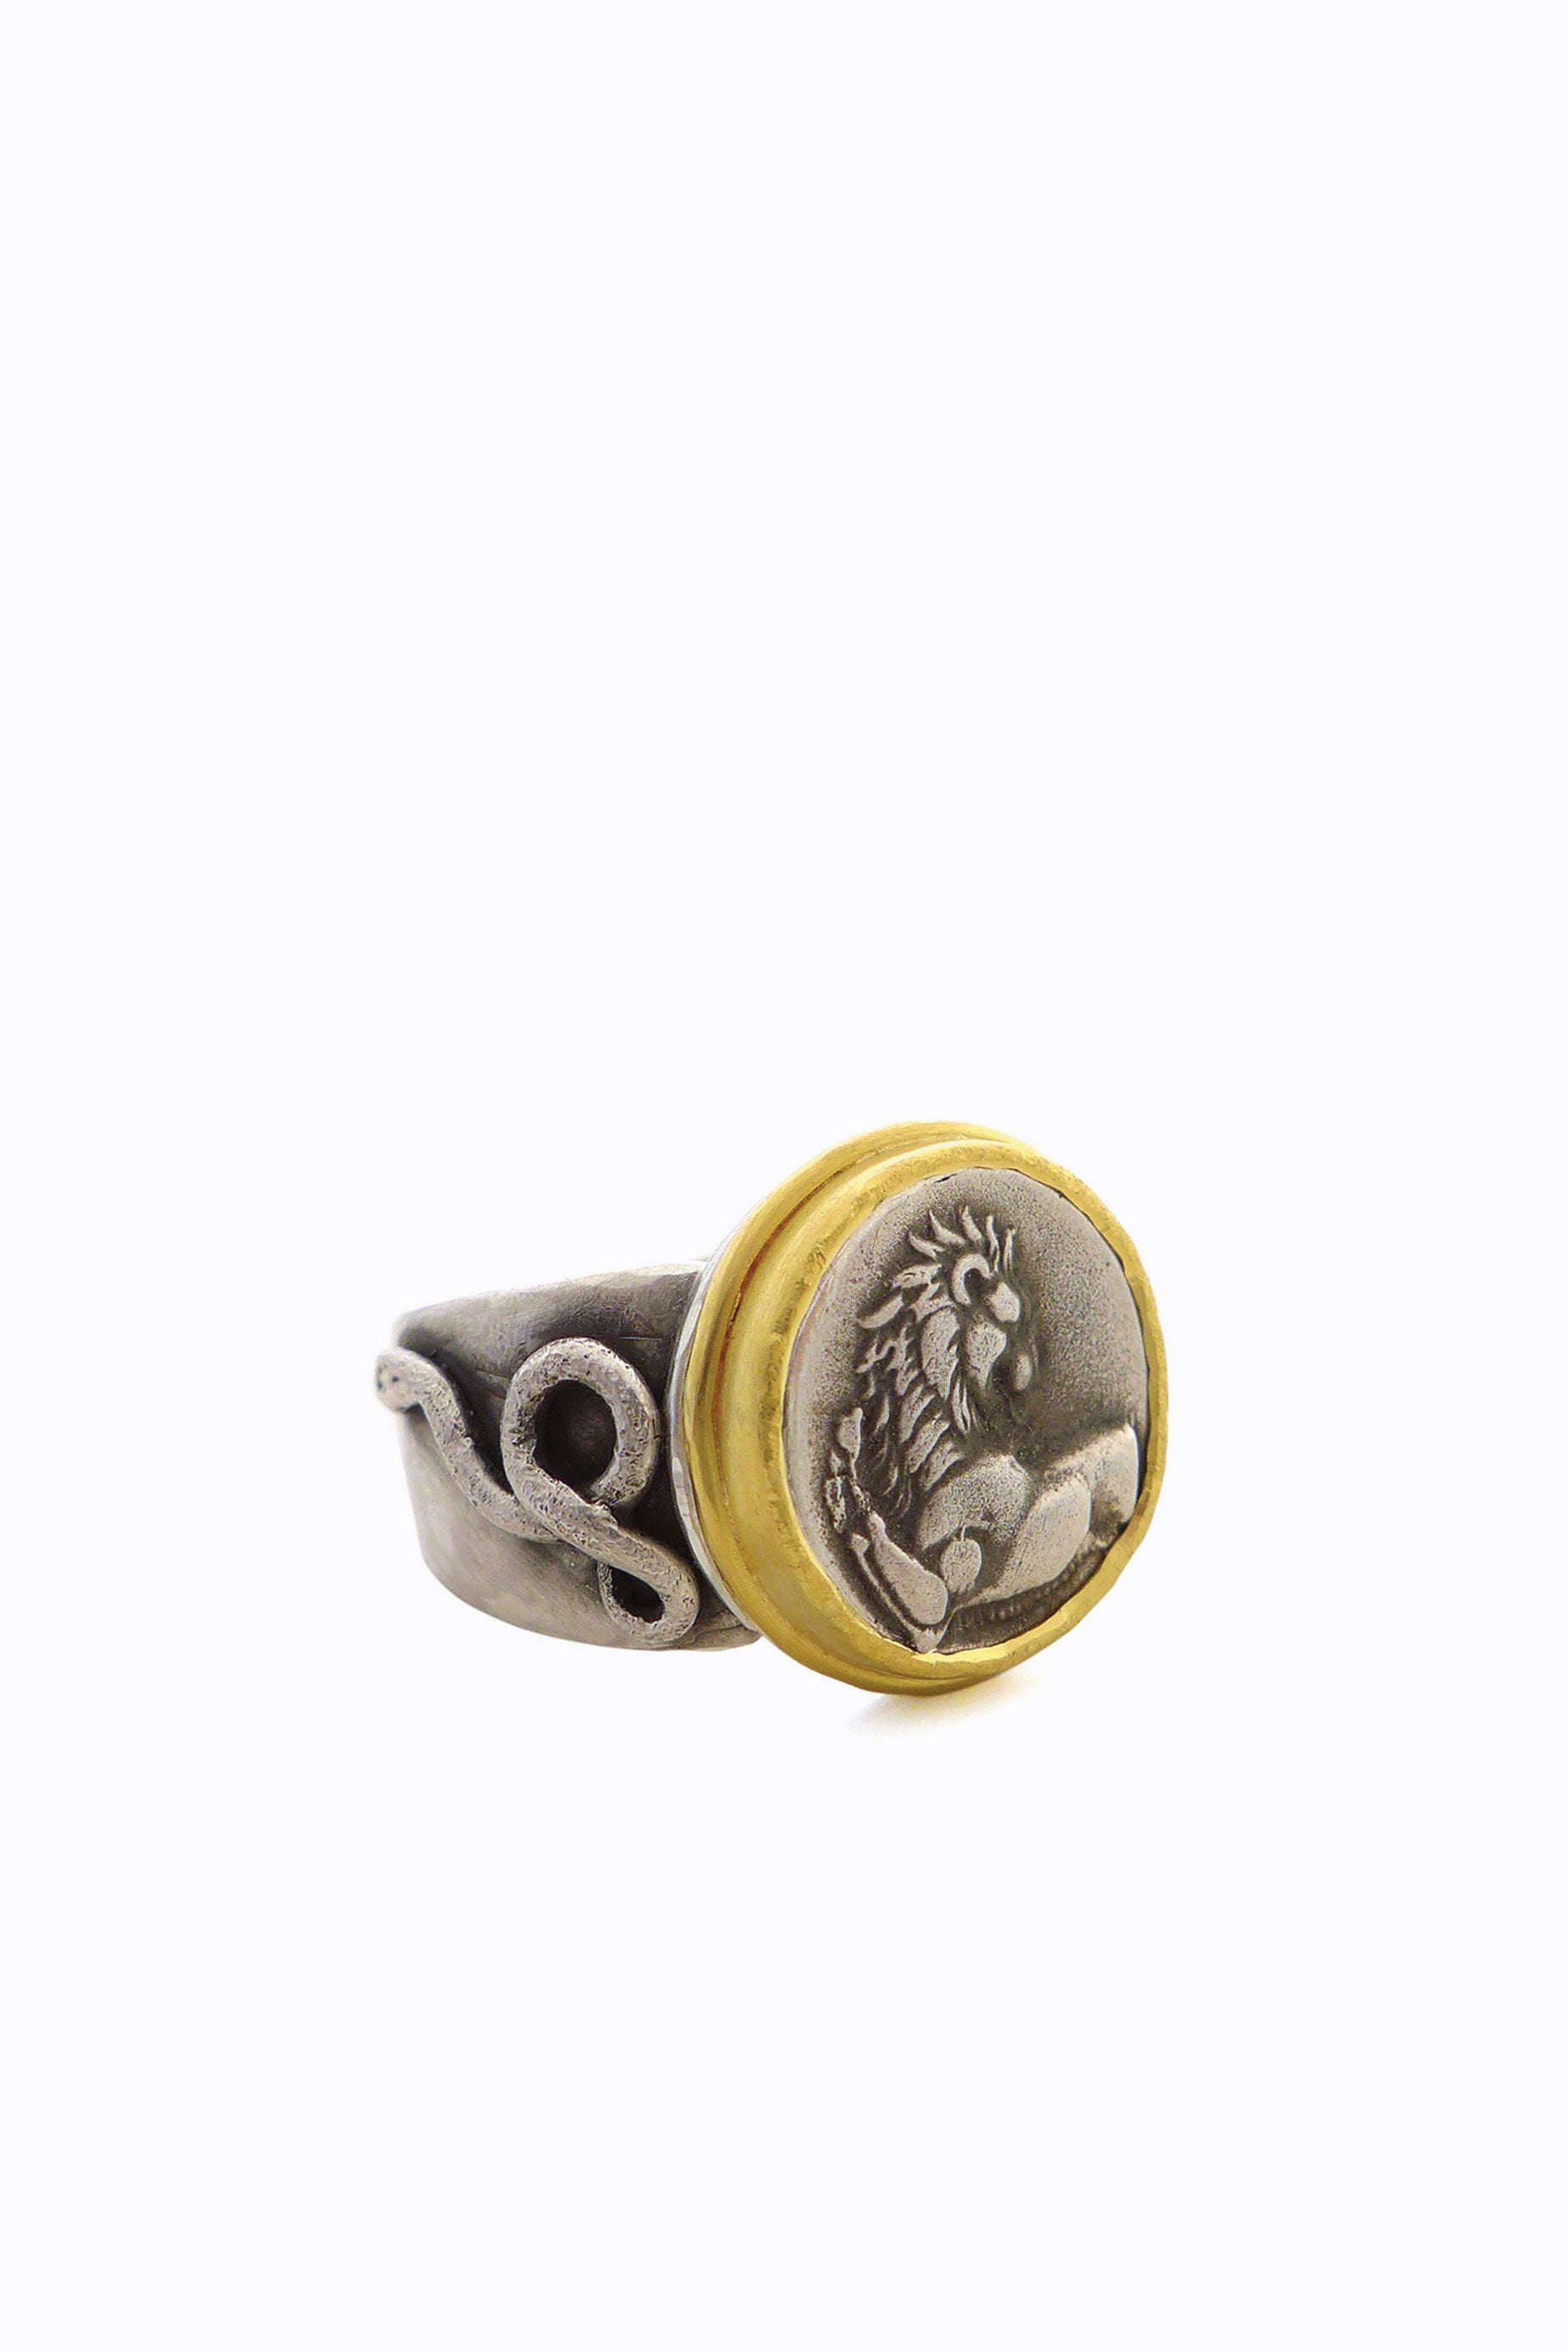 Silver & Gold Tanis Ring